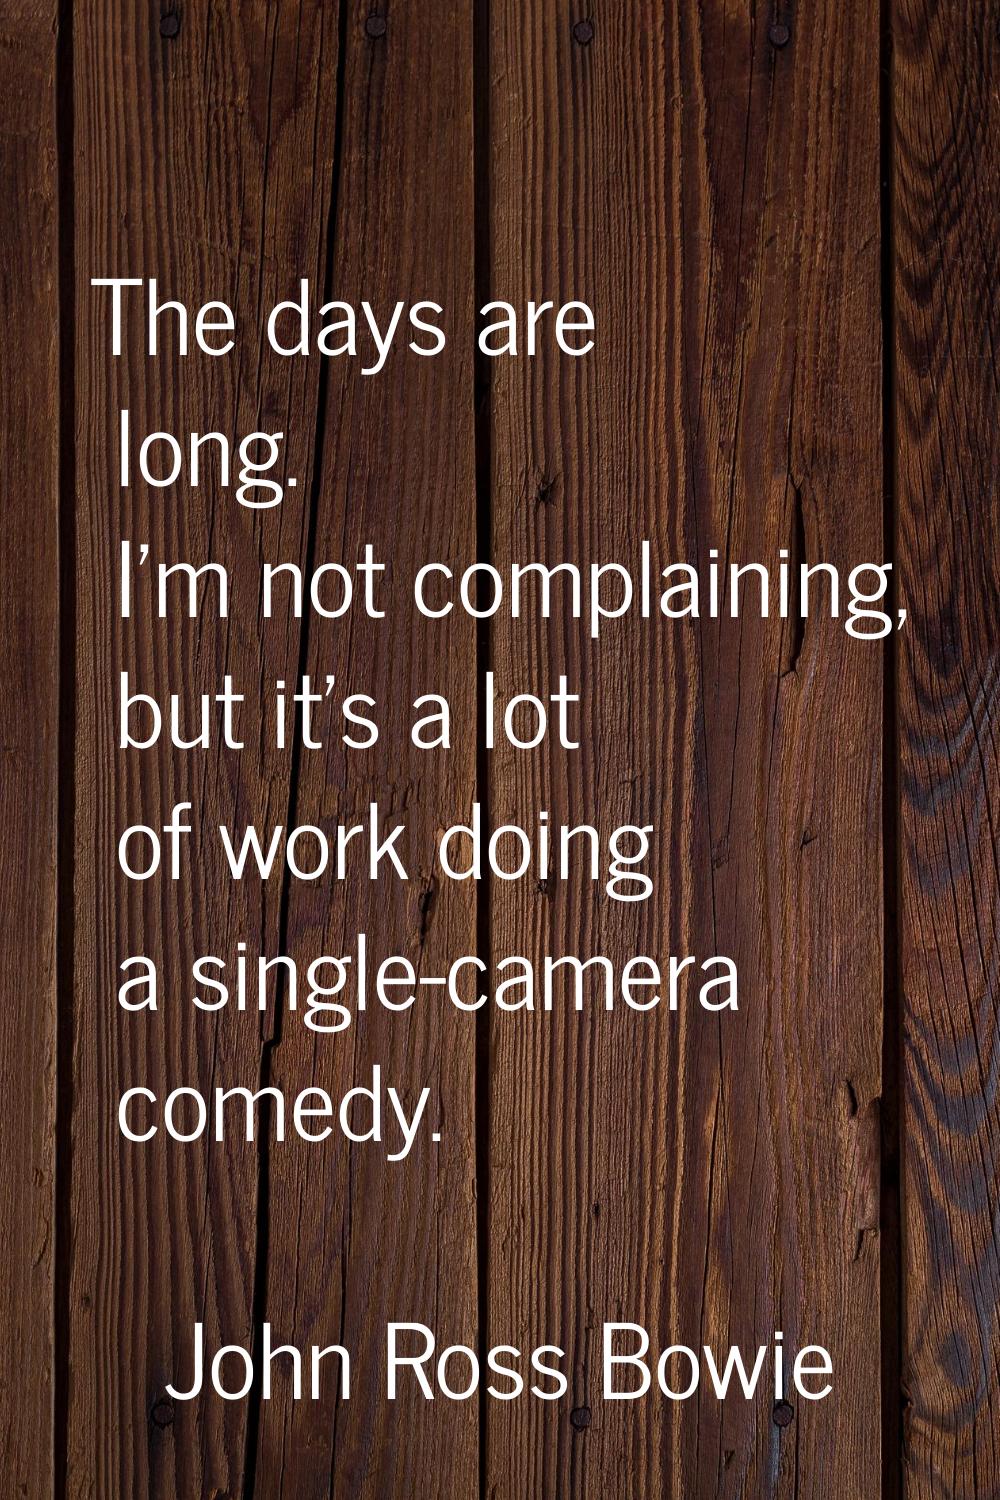 The days are long. I'm not complaining, but it's a lot of work doing a single-camera comedy.